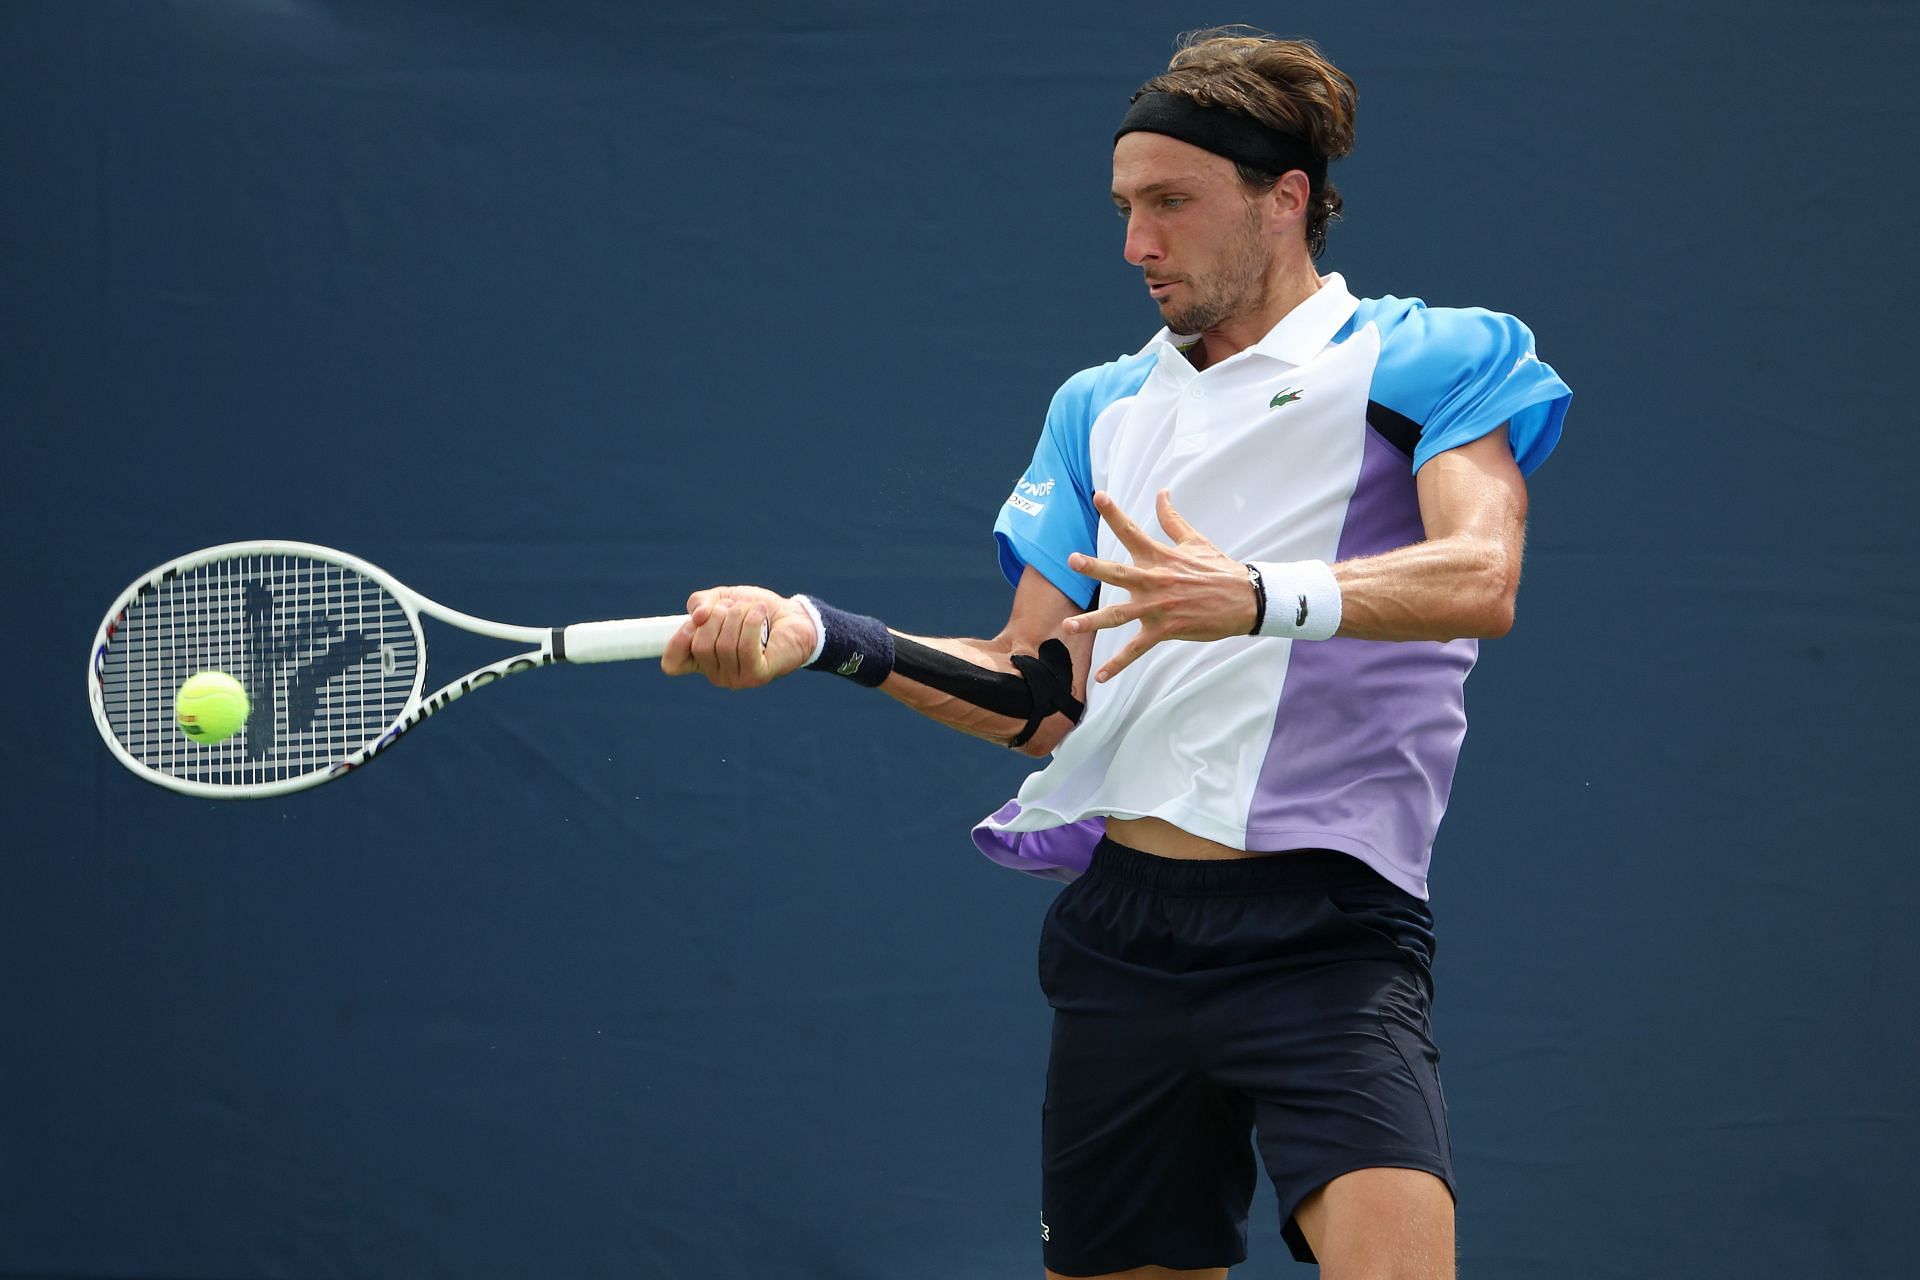 Arthur Rinderknech plays a forehand against Quentin Halys at the 2022 US Open - Day 1